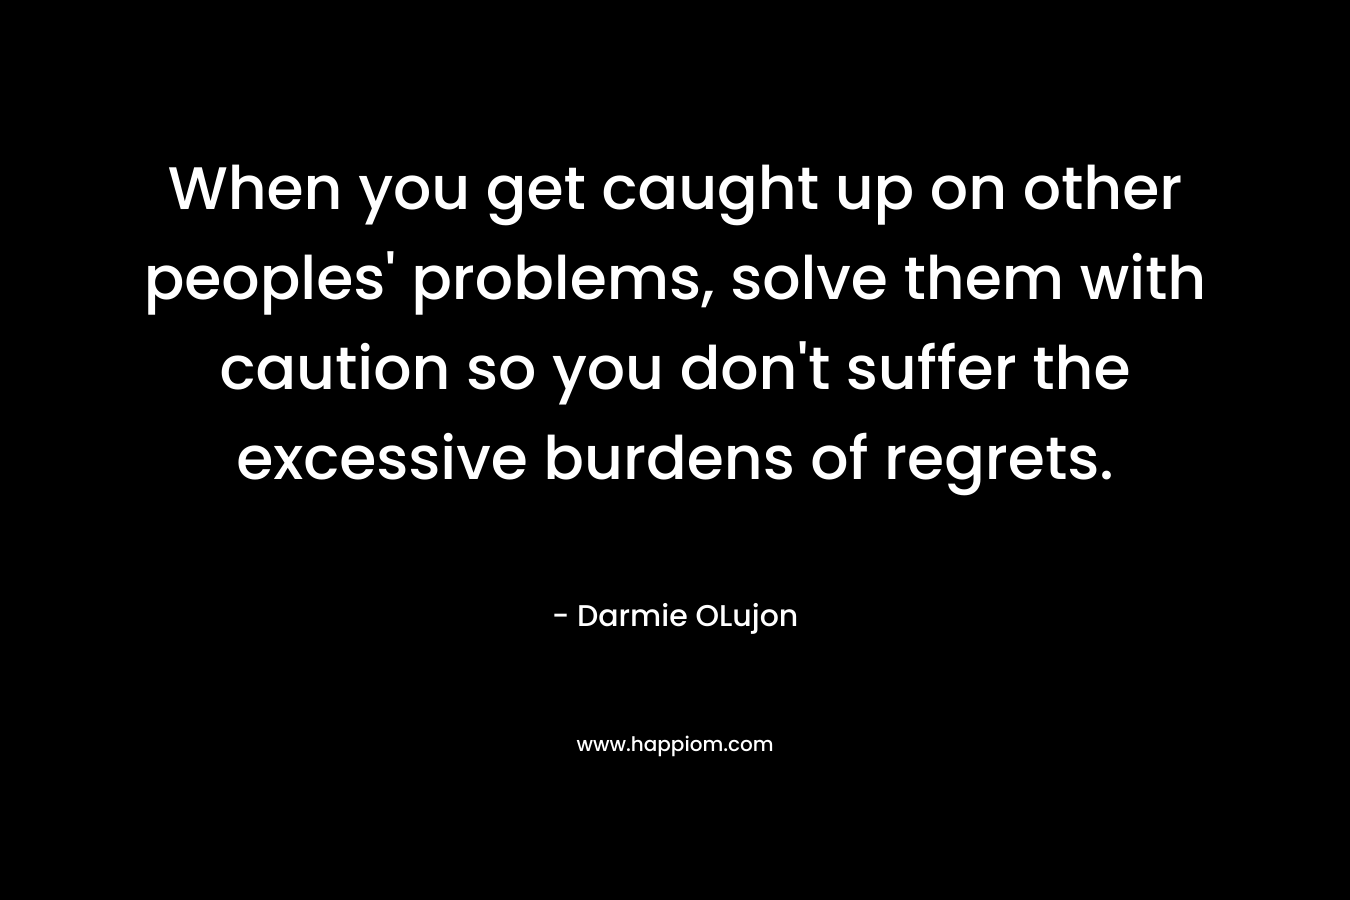 When you get caught up on other peoples’ problems, solve them with caution so you don’t suffer the excessive burdens of regrets. – Darmie OLujon